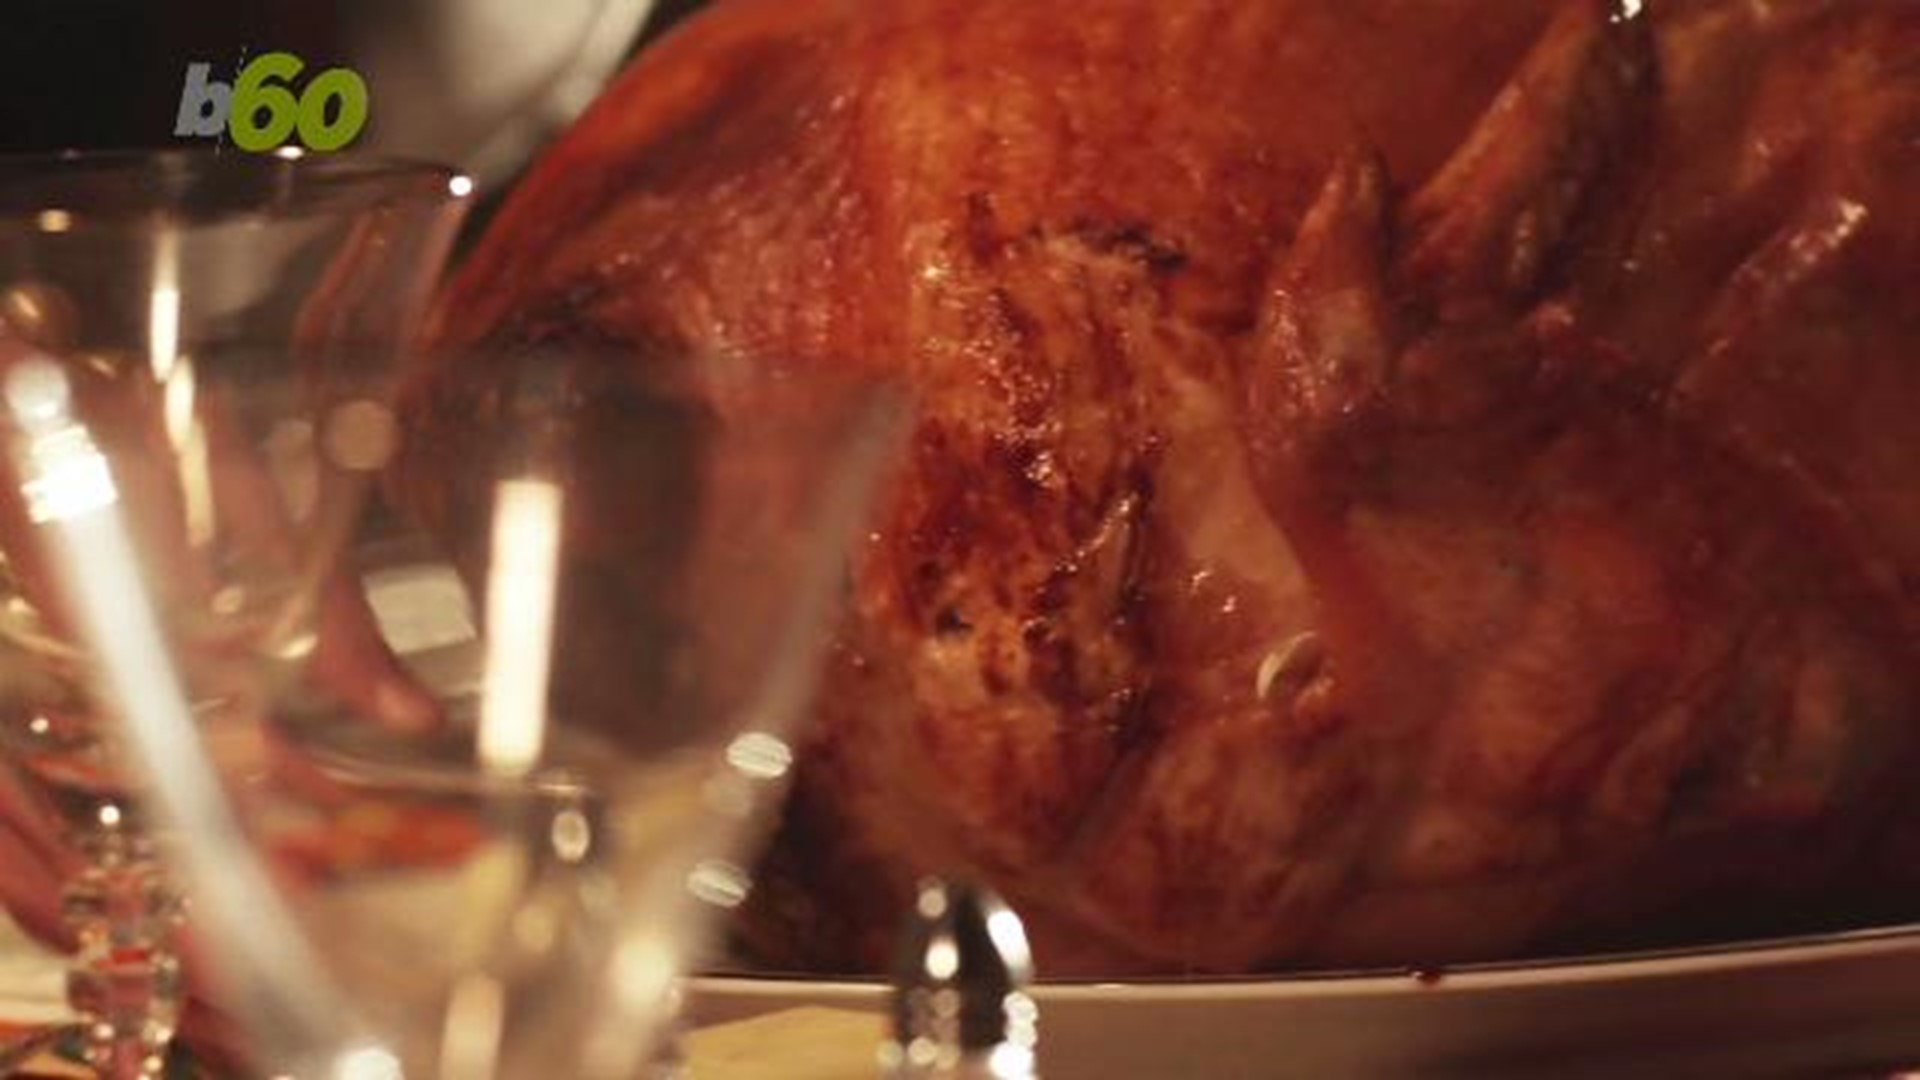 The experts at the Butterball Turkey Talk Line have been there for 36 years to help you serve the perfect Thanksgiving turkey. Take their advice. Sean Dowling (@seandowlingtv) has more.